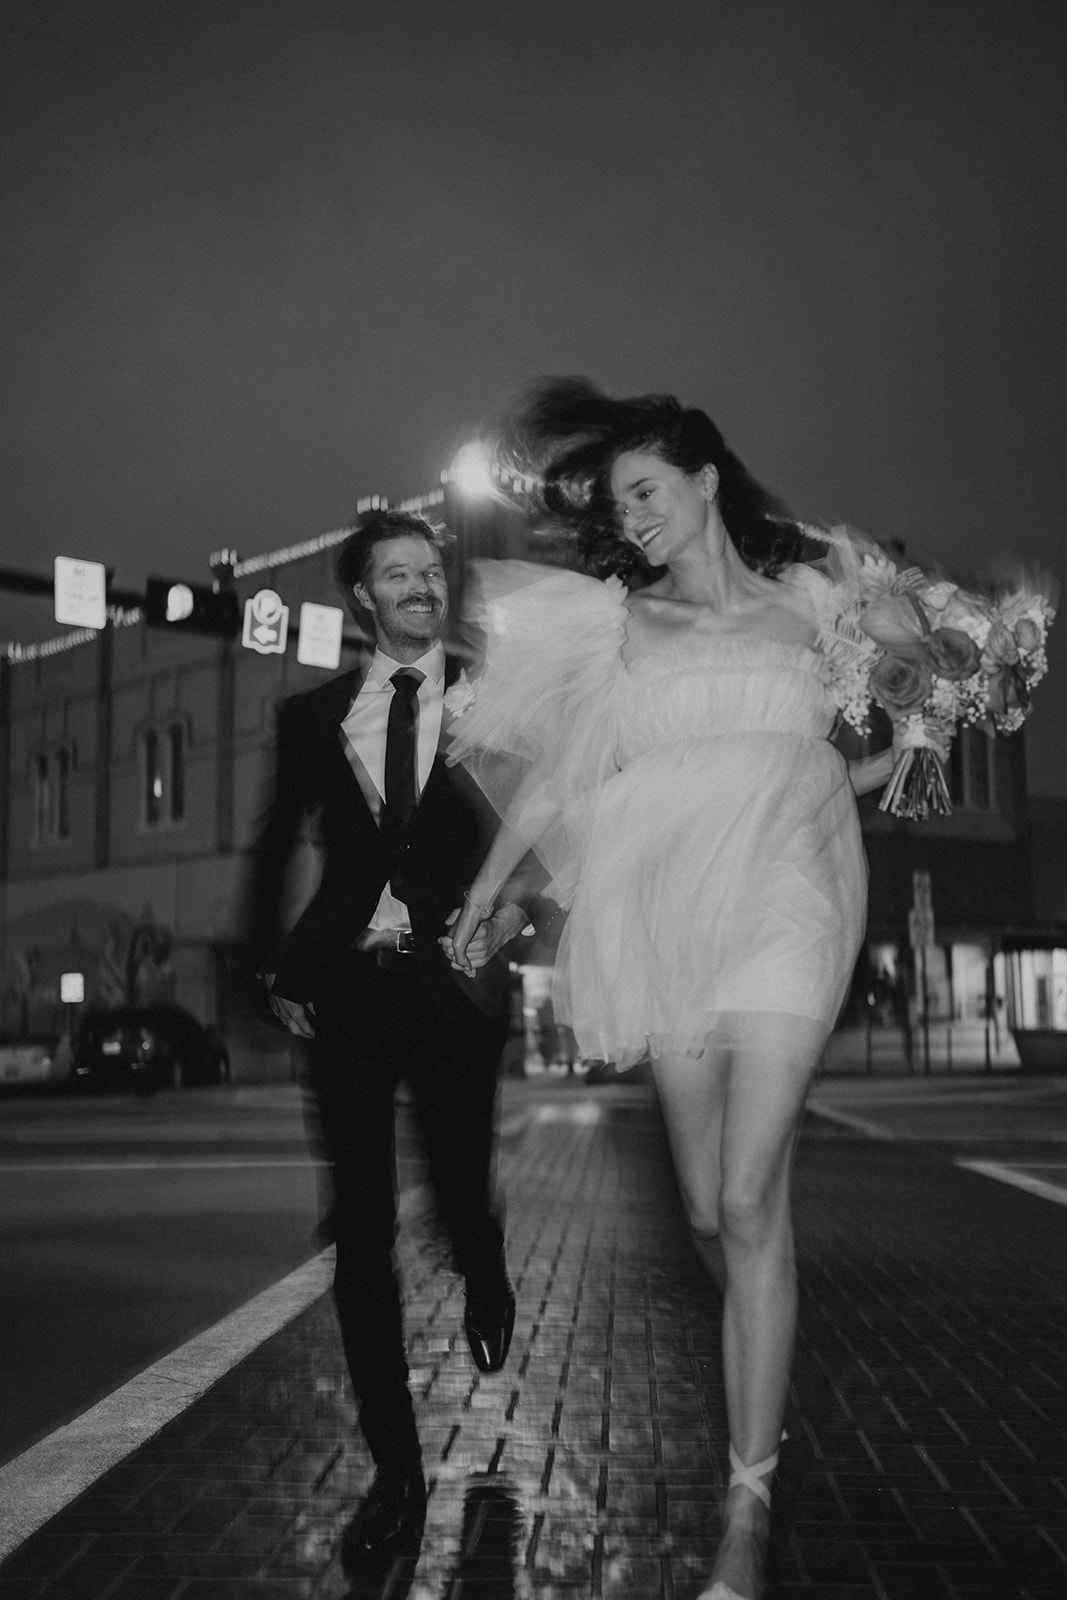 Bride and groom running downtown documented in a  black and white blurry photo